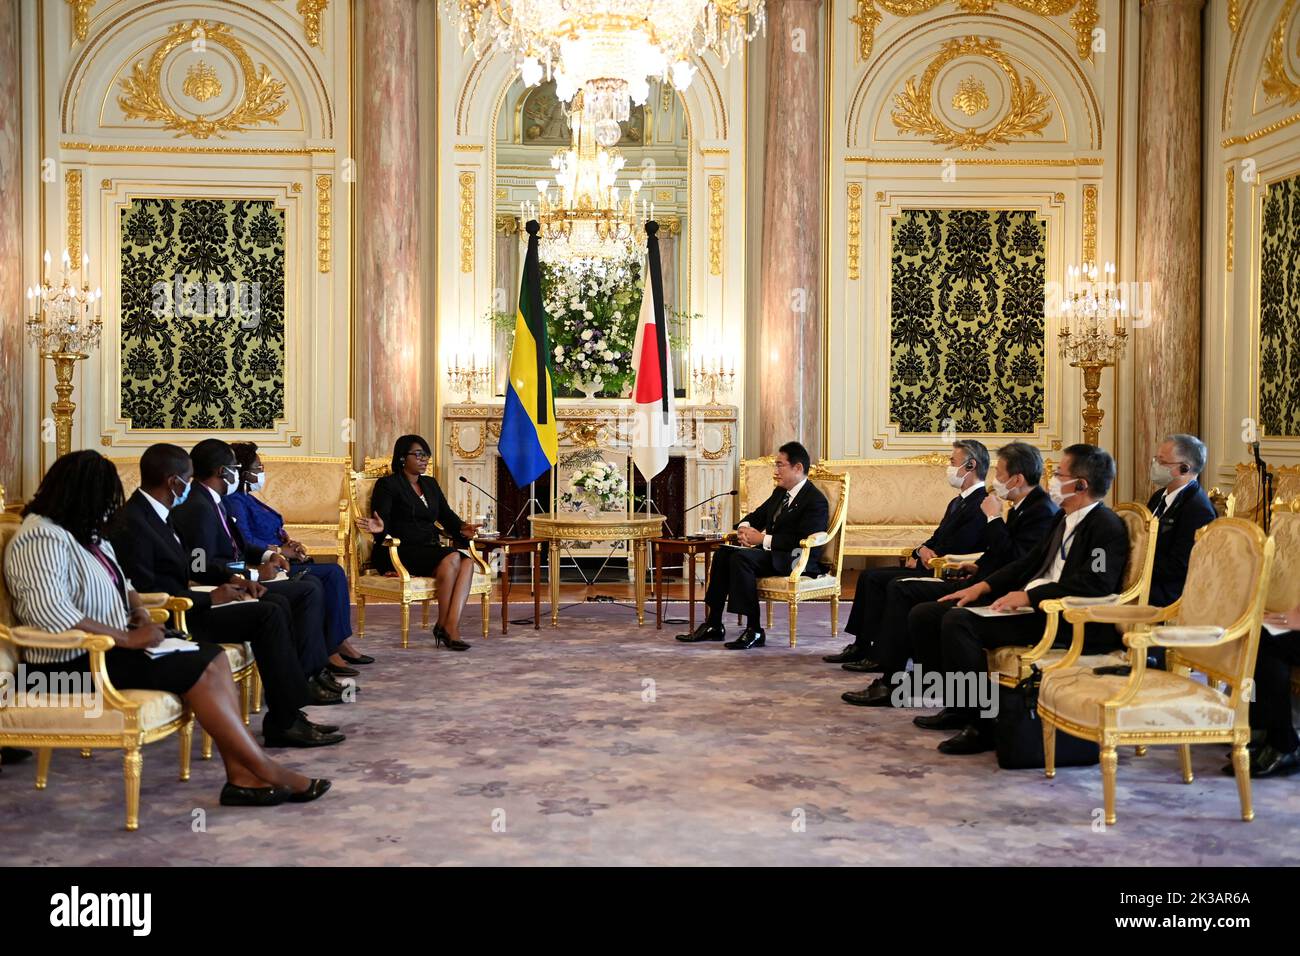 TOKYO, JAPAN - SEPTEMBER 26 : Gabon Prime Minister Rose Christiane Ossouka Raponda and Japan's Prime minister Fumio Kishida (R) talk during the Japan-Gabon Summit Meeting at Akasaka Palace State Guest House in Tokyo, Japan on September 26, 2022 in Tokyo, Japan. Gabon Prime Minister Rose Christiane Ossouka Raponda and Moussa Adamo, Minister of Foreign Affairs of Republic of Gabon, are visiting Japan within the state funeral for former Prime Minister Shinzo Abe that will be held on September 27 in the capital of Japan. David Mareuil/Pool via REUTERS Stock Photo